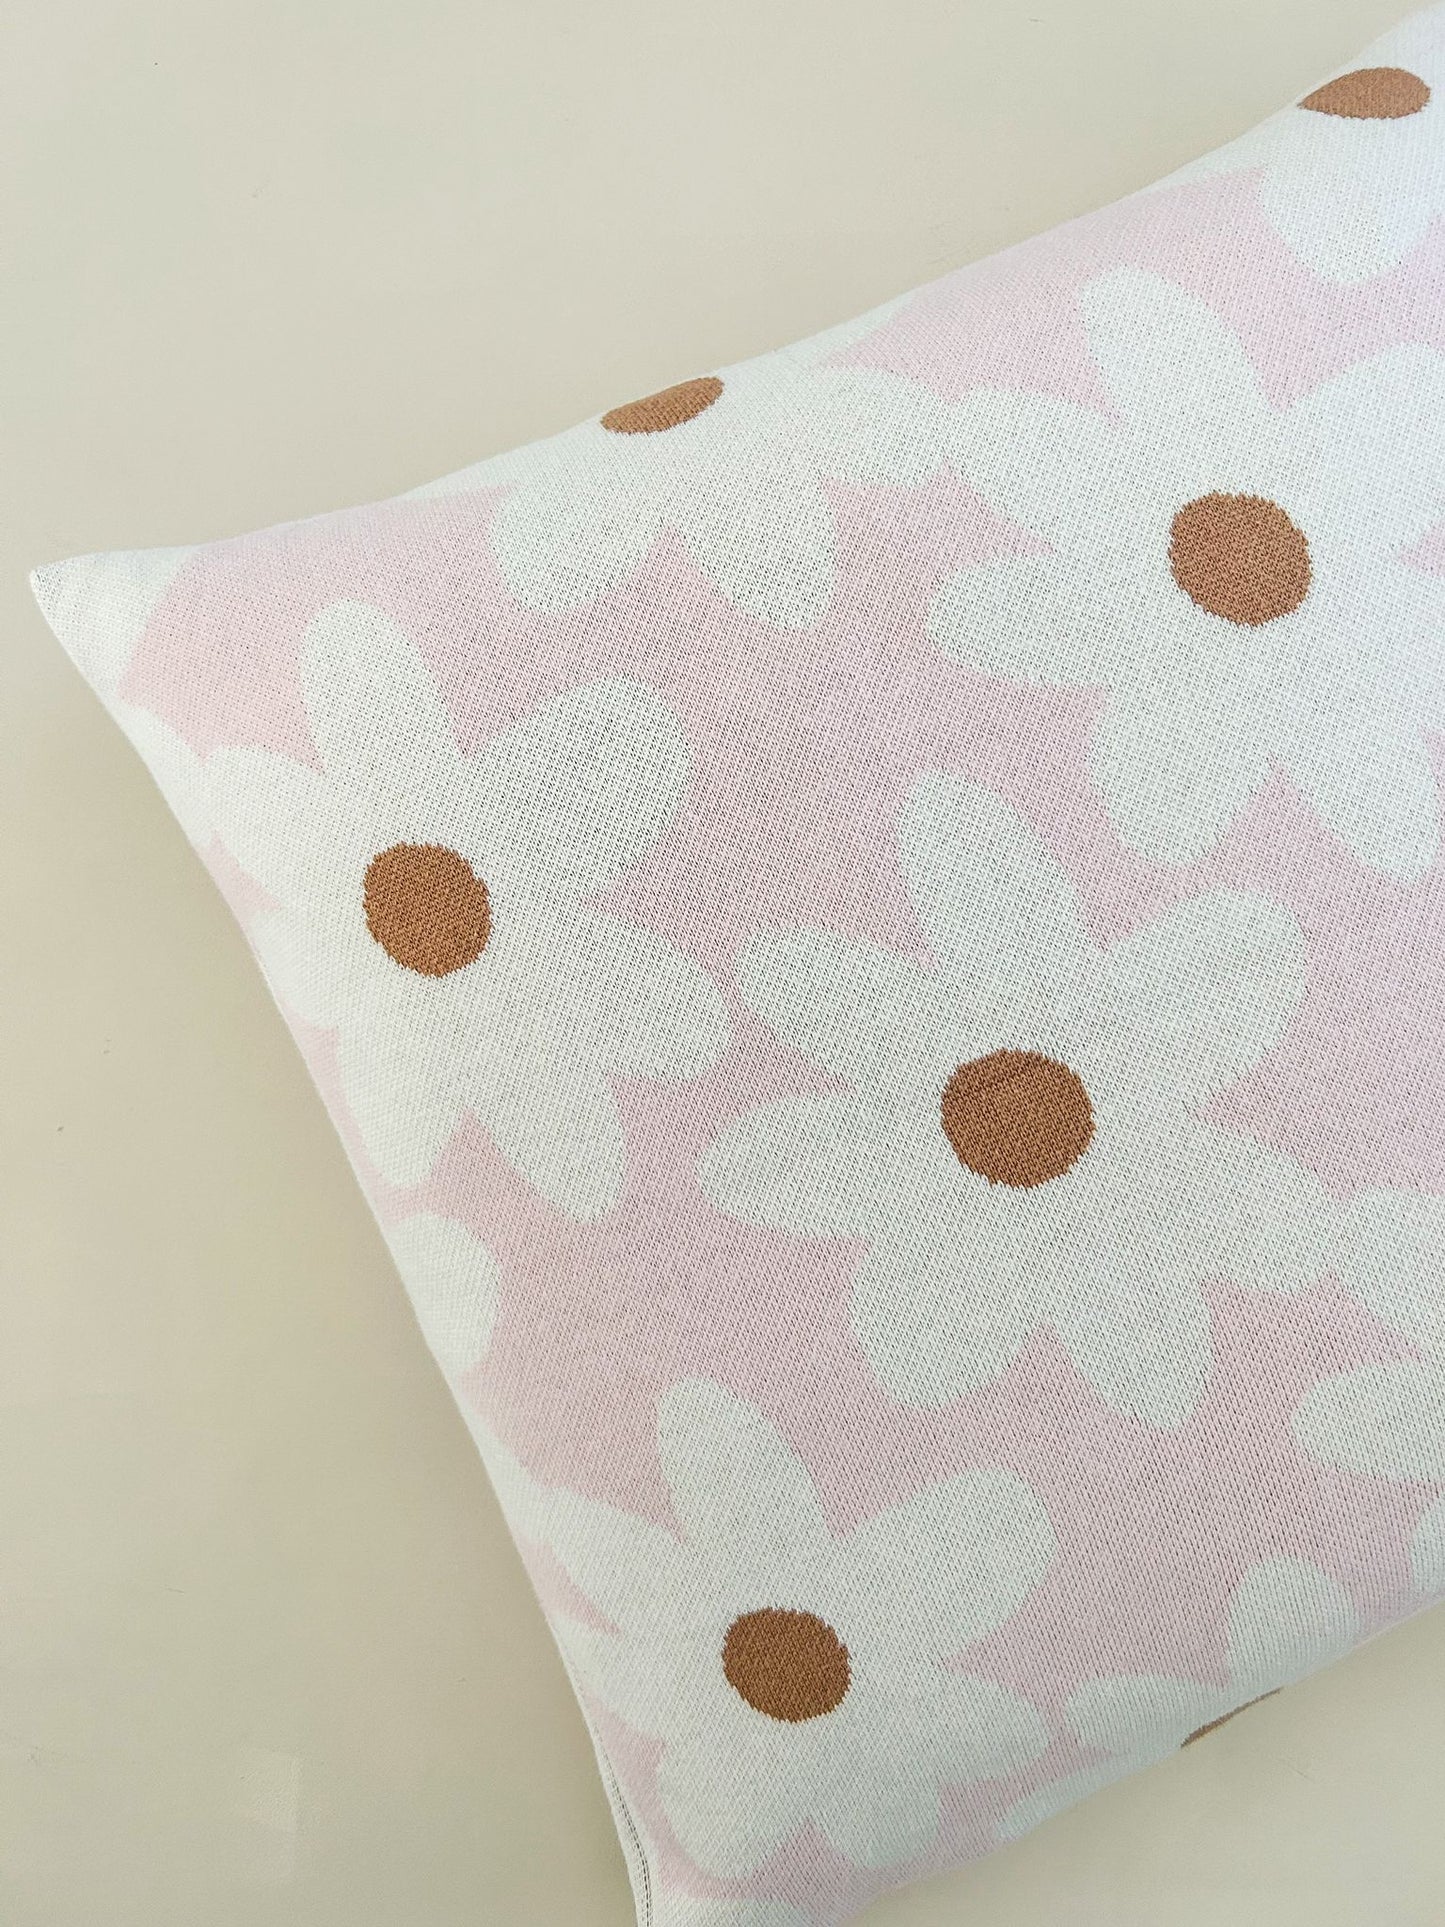 100% Organic Cotton Jacquard Knit Cushion Cover - Floral - 50% OFF